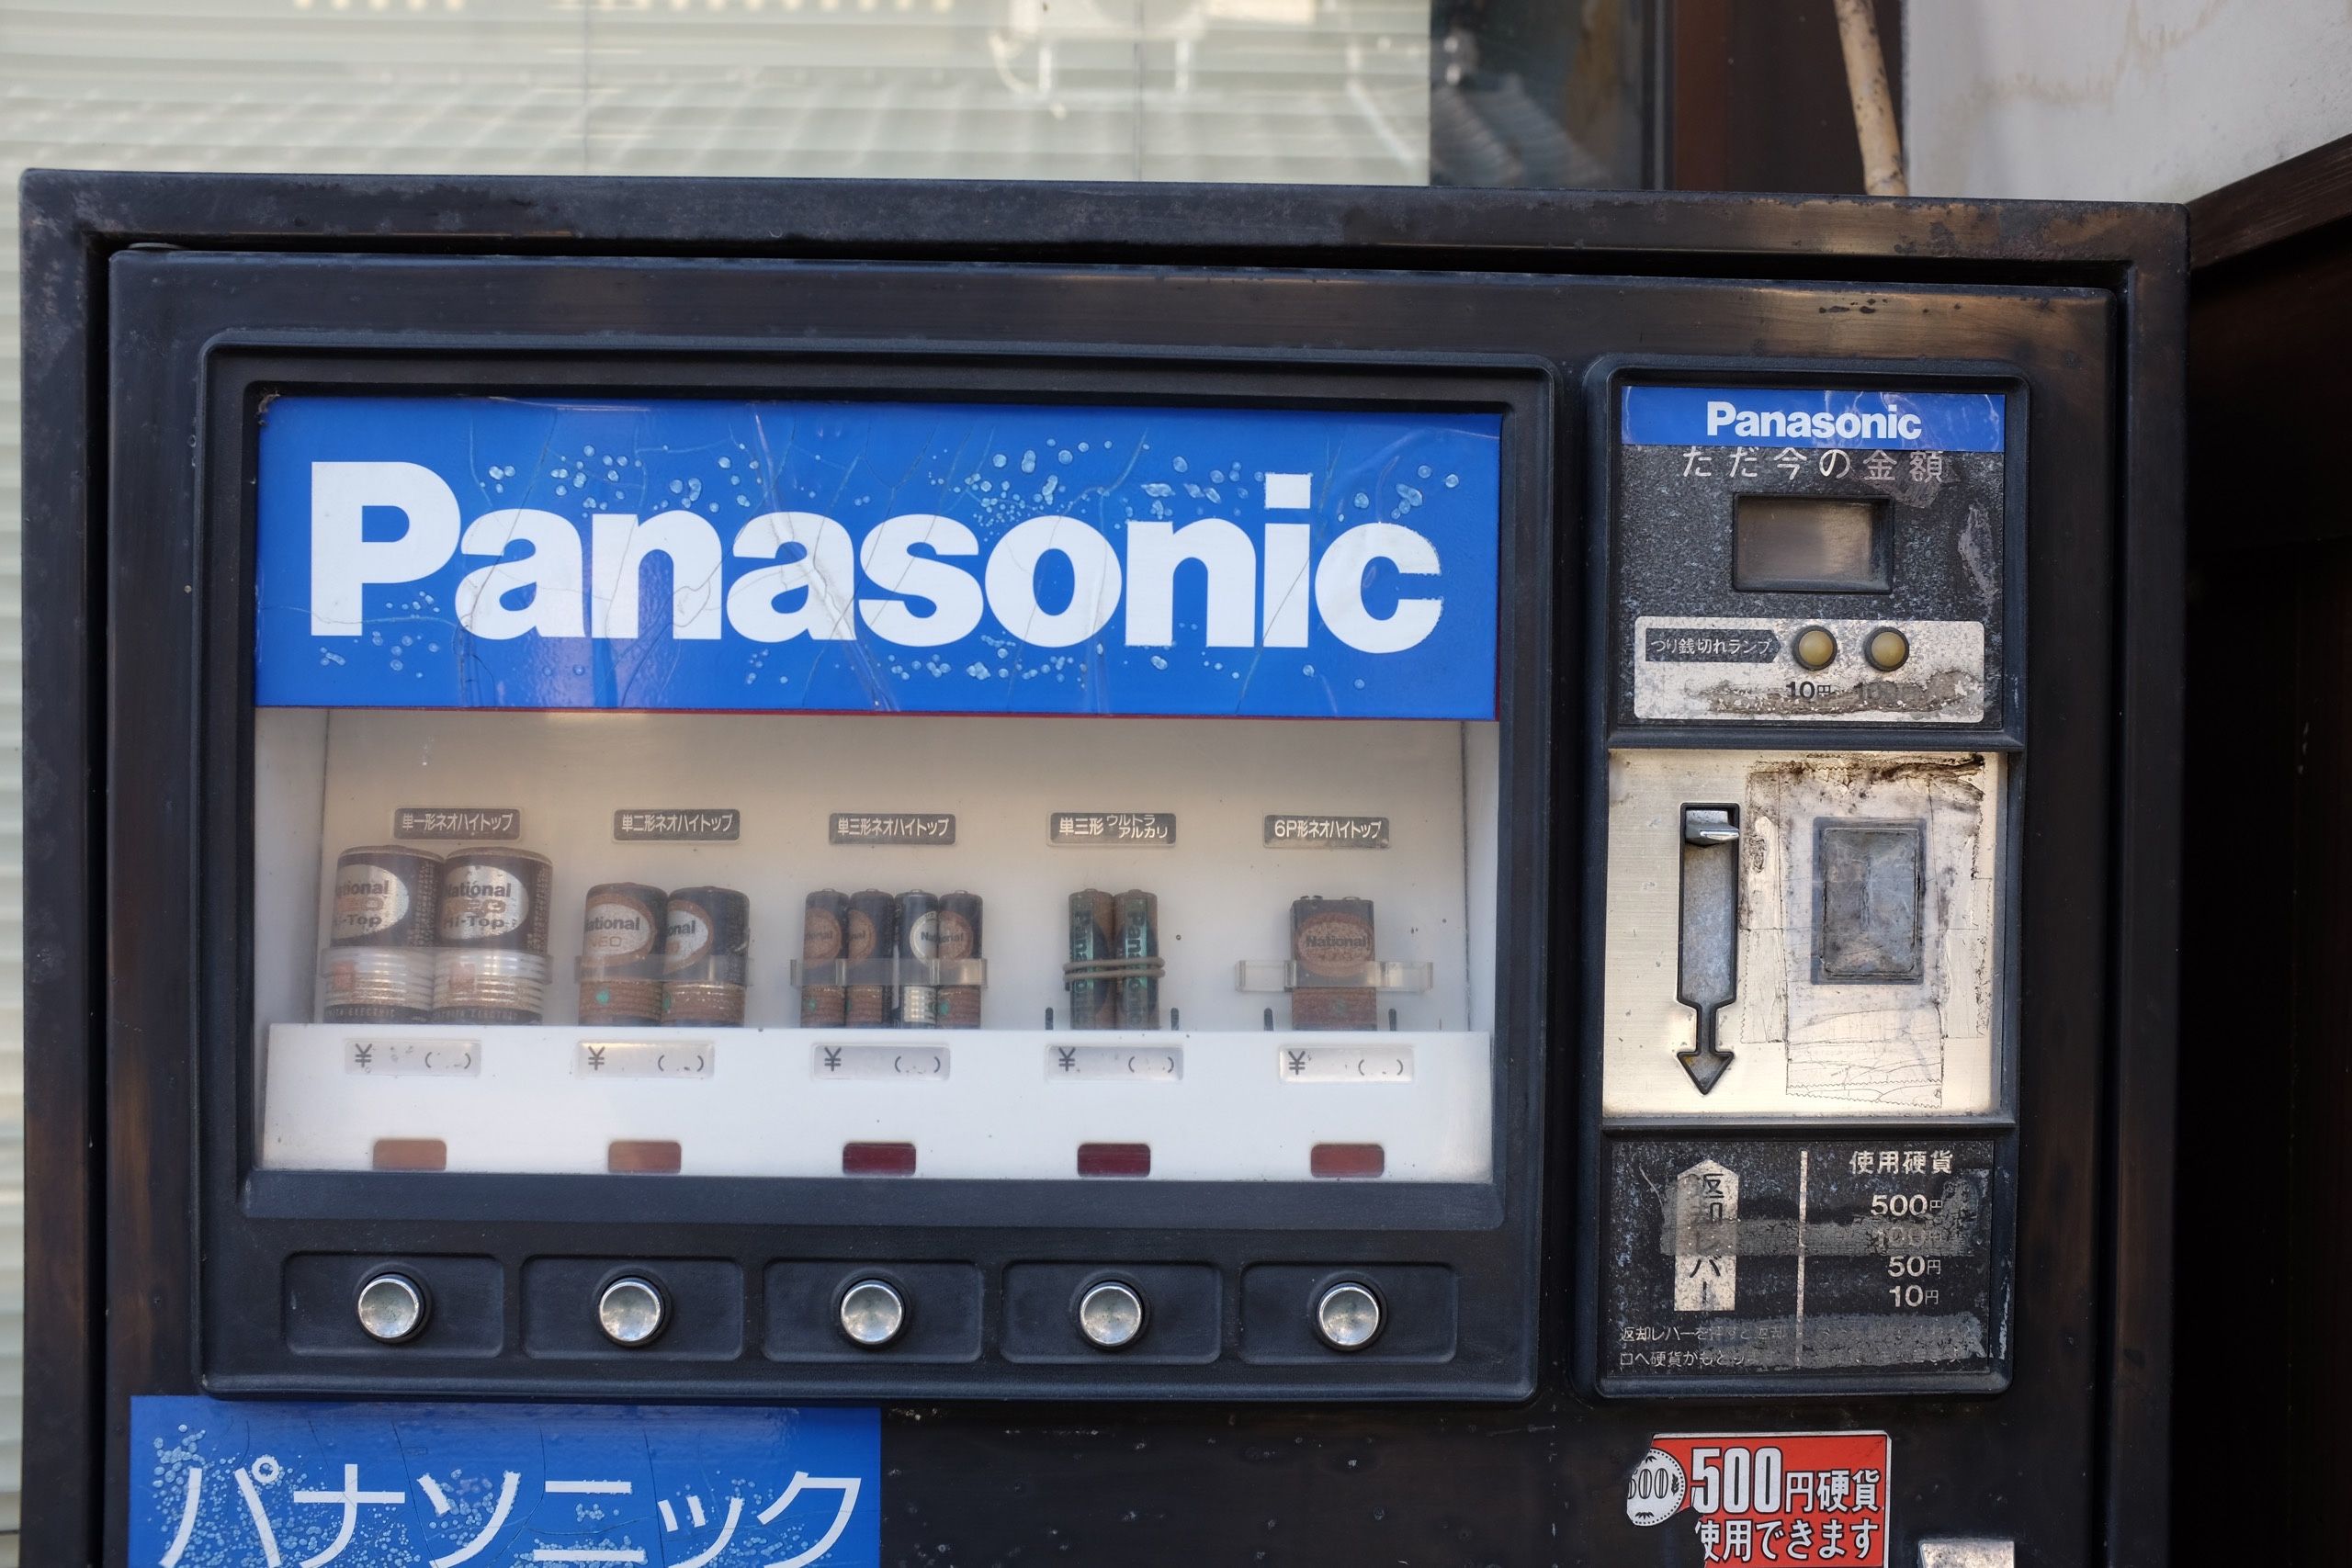 A Panasonic vending machine that sells batteries, now rusty and most likely not working.